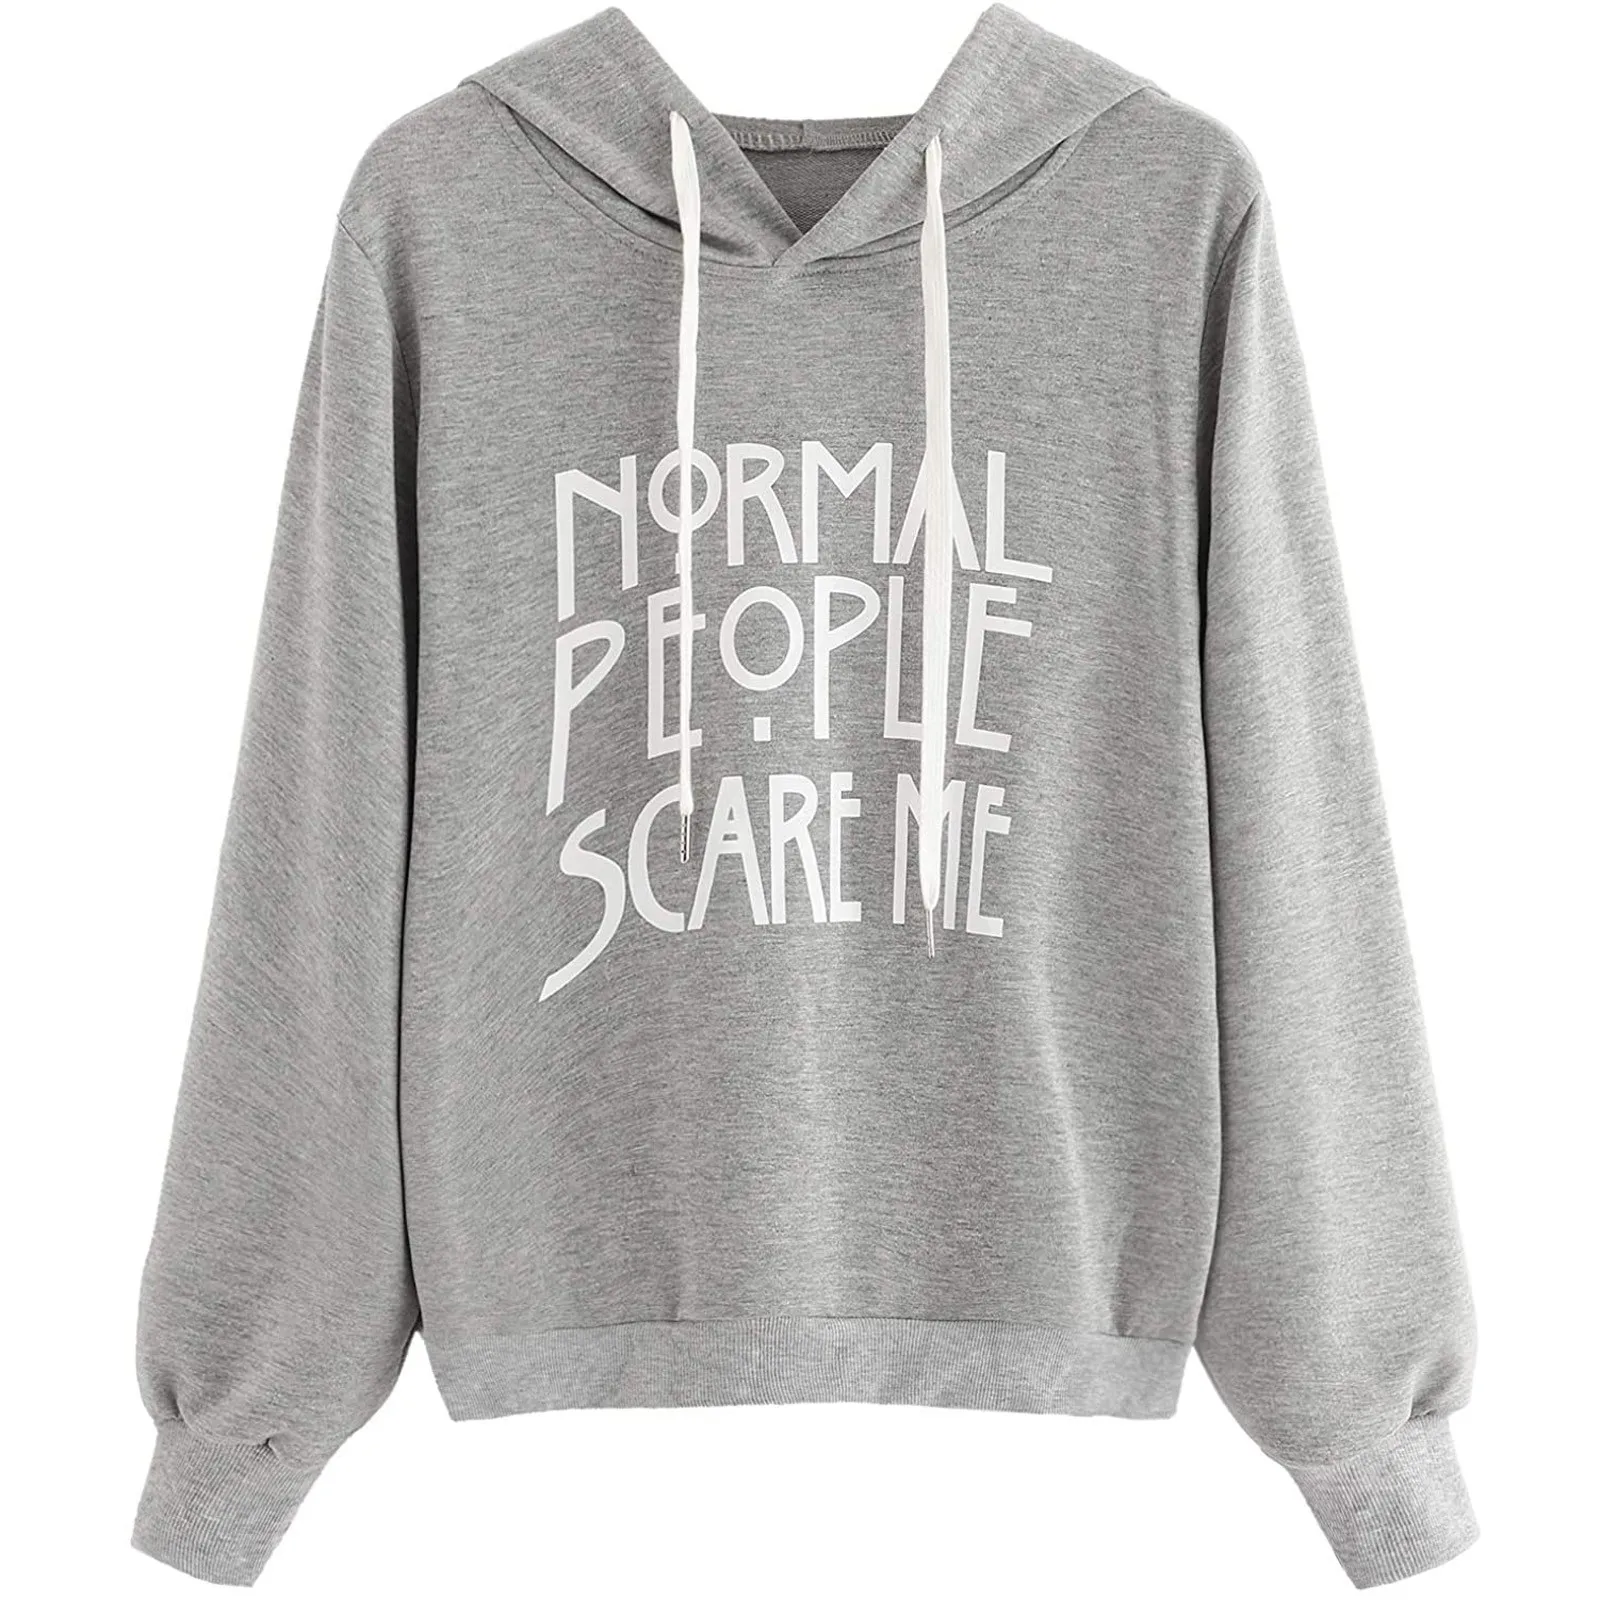 Normal People Scare Me Sweatshirt Womens Letter Print Pullover Long Sleeves Top Blouse 